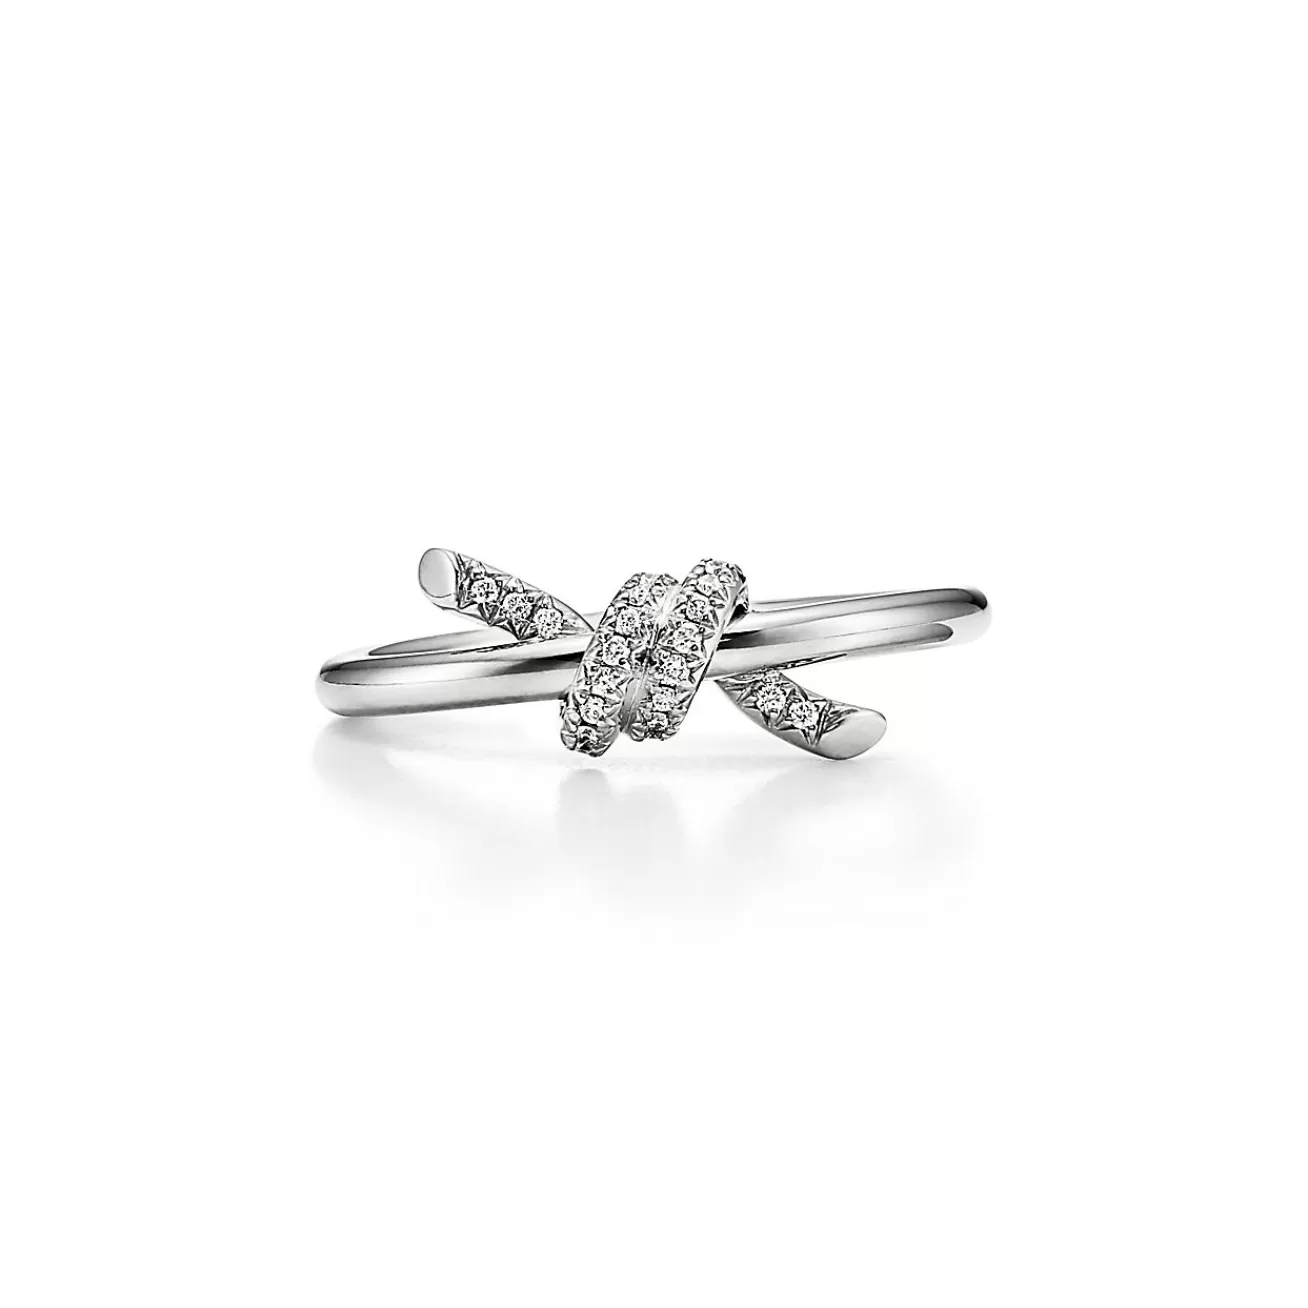 Tiffany & Co. Tiffany Knot Ring in White Gold with Diamonds | ^ Rings | Diamond Jewelry